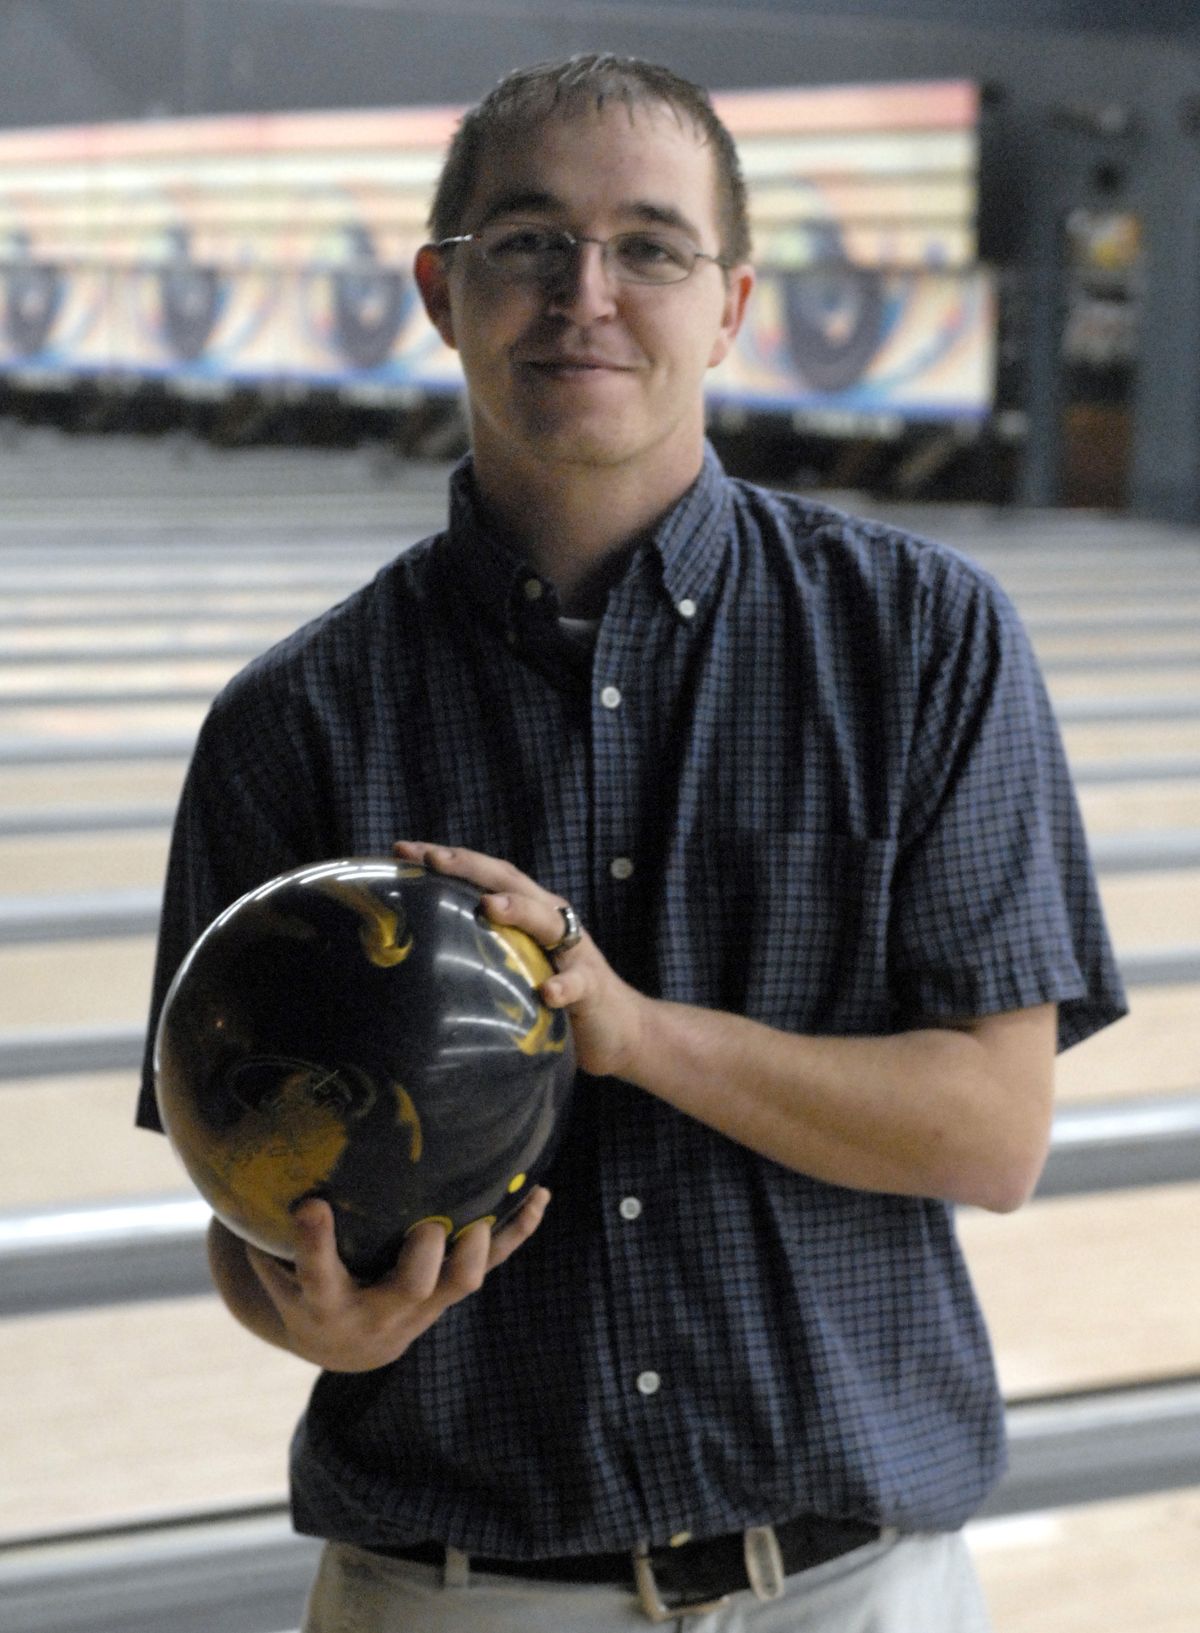 Fleck recently bowled a 300 game at Big Daddy’s, despite the lingering pain from his tuberculosis. (J. Rayniak / The Spokesman-Review)